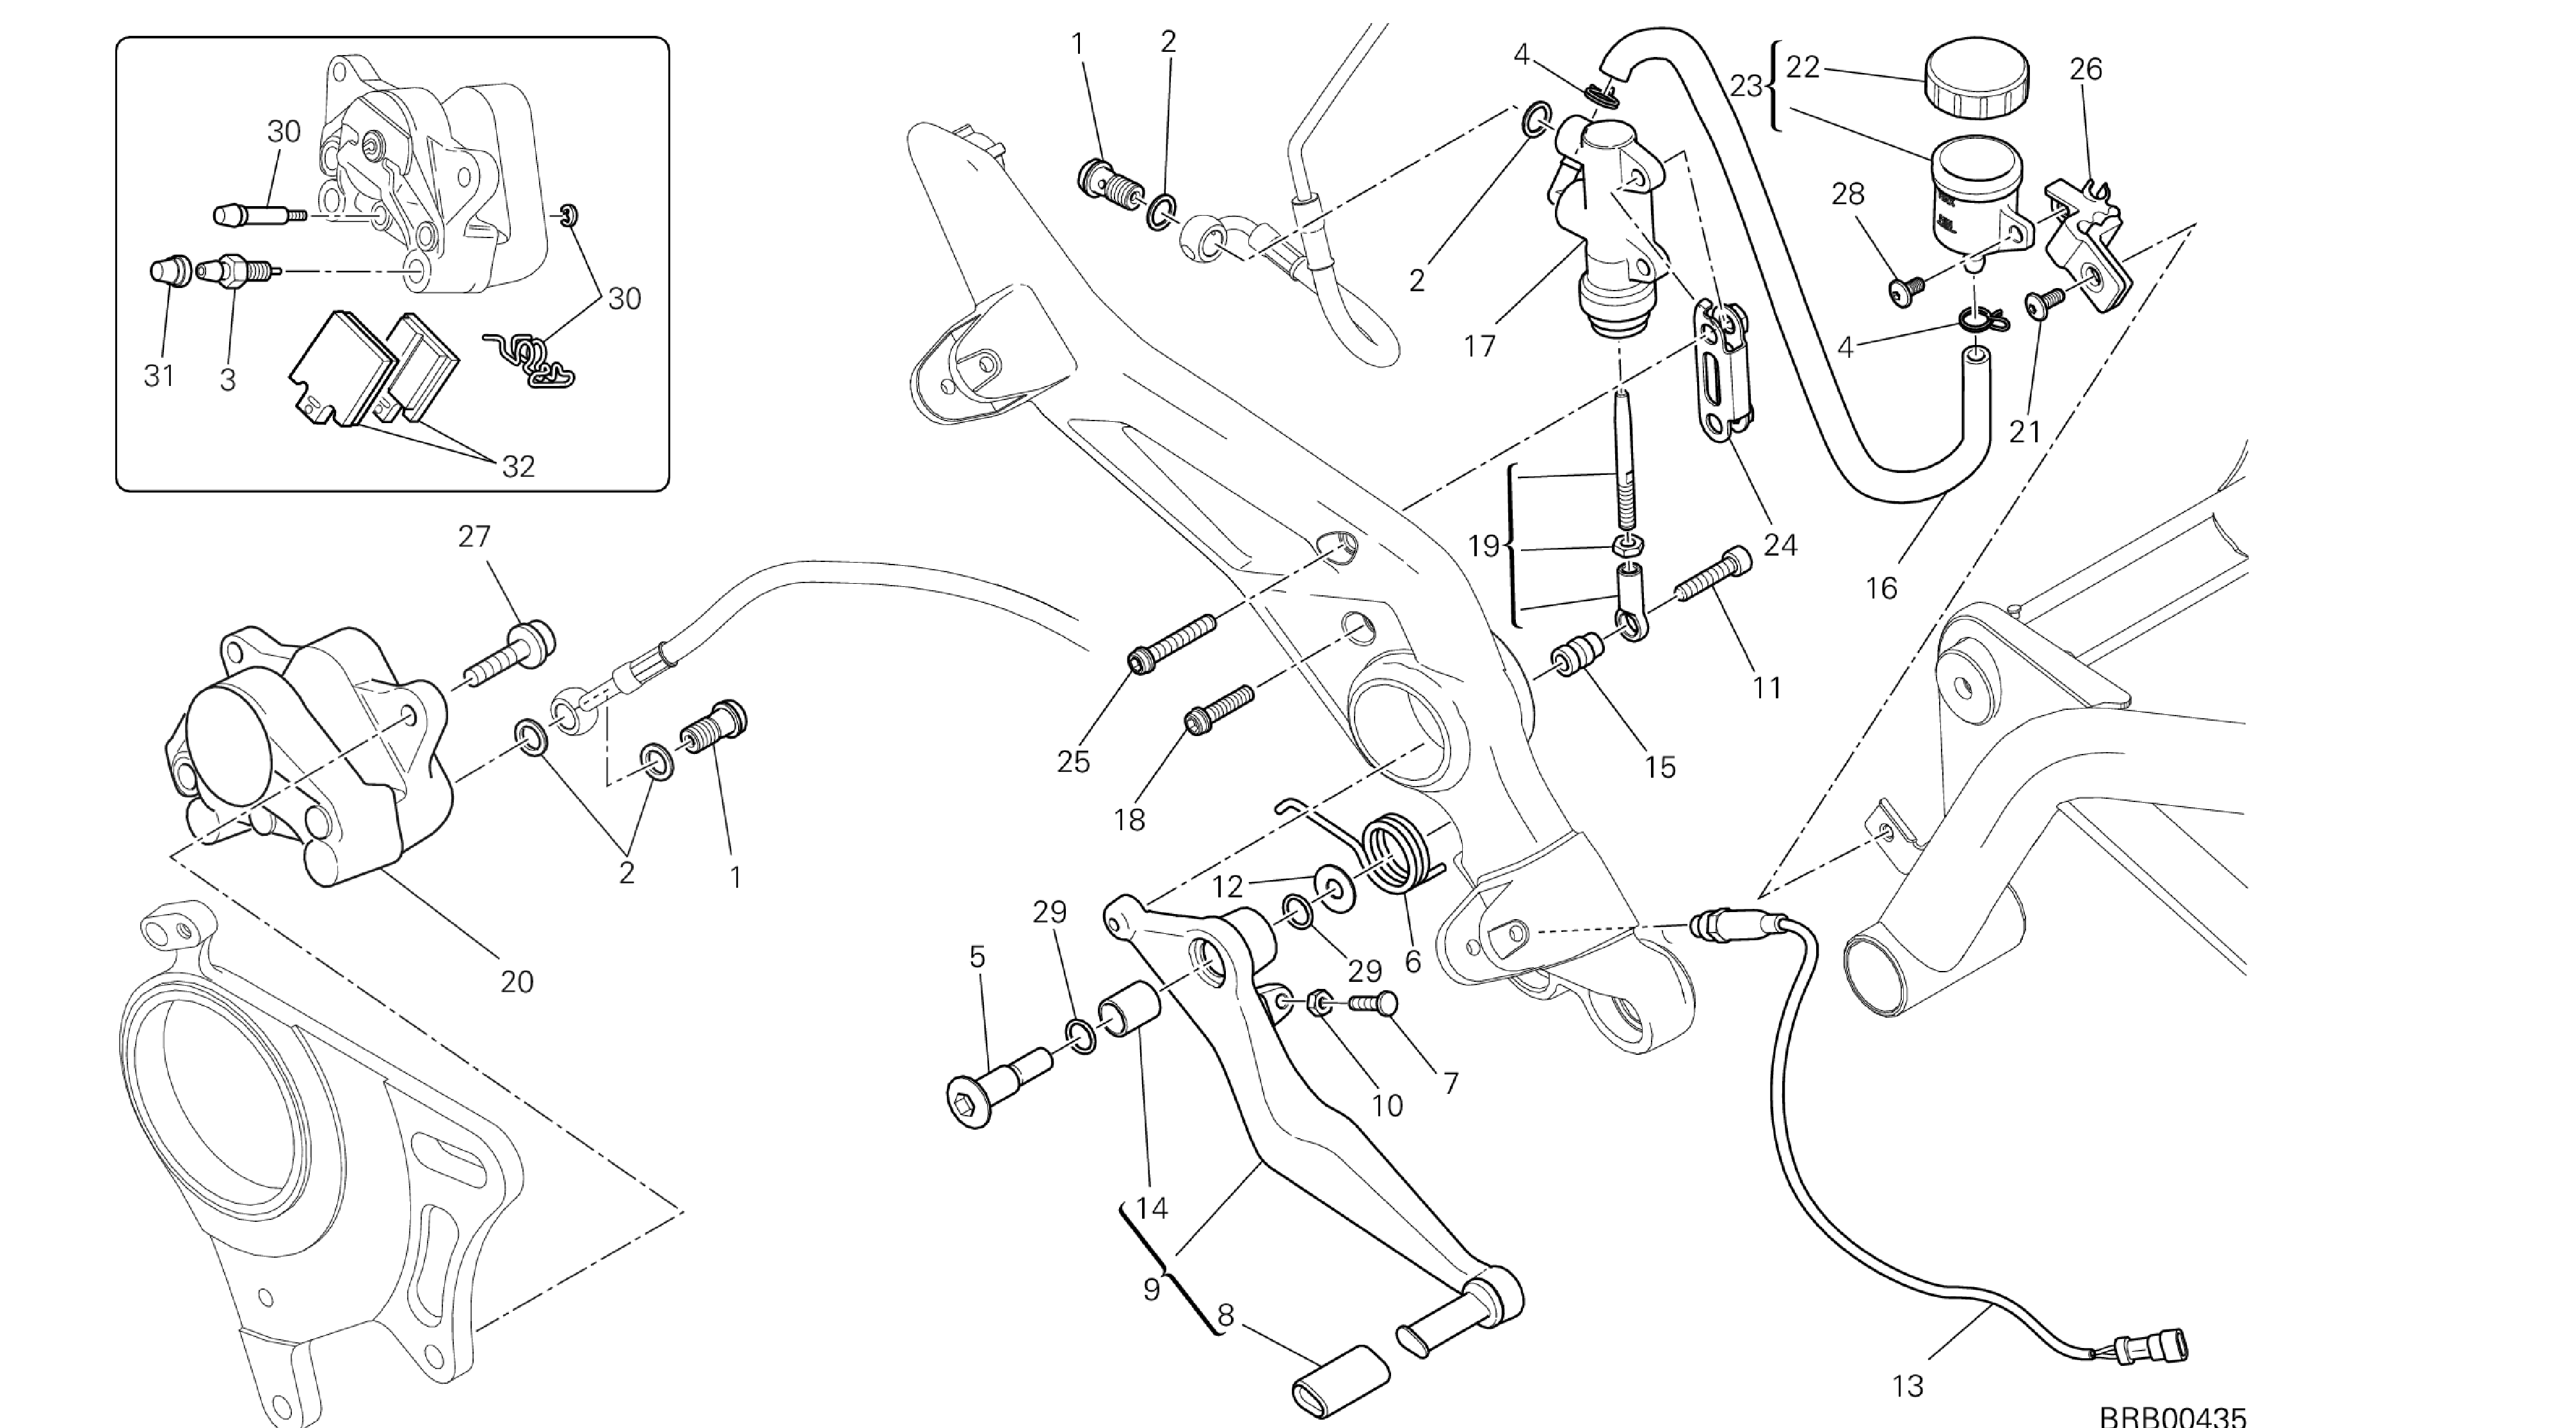 DRAWING 025 - REAR BRAKE SYSTEM [X ST:CAL,C DN,EUR] GROUP FR AME